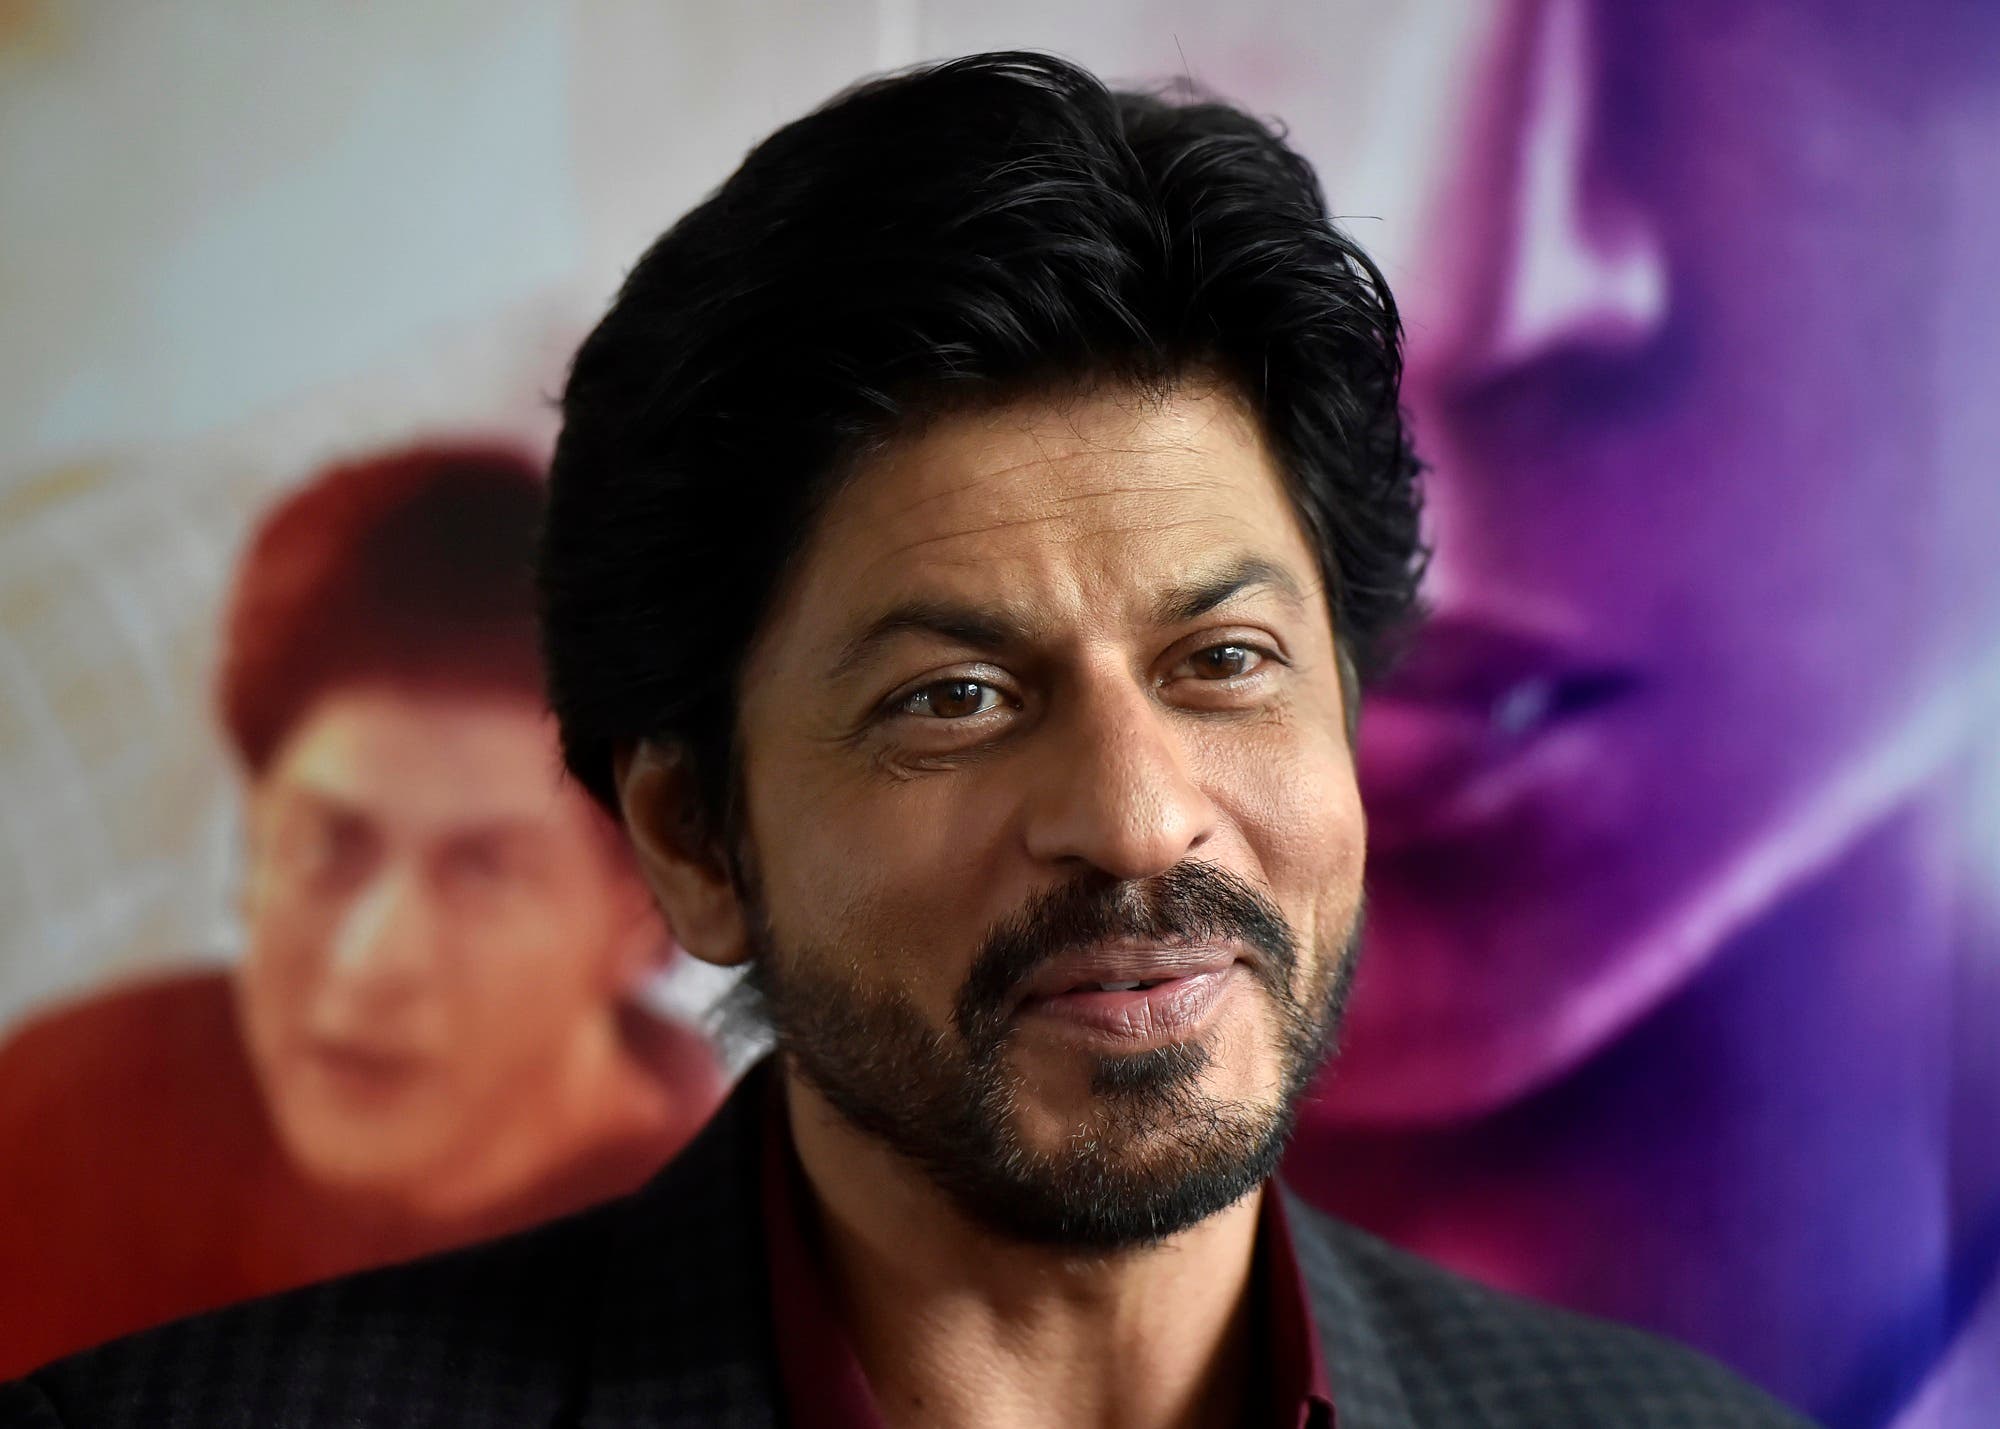 30 years of Shah Rukh Khan, and the age of innocence | Mint Lounge